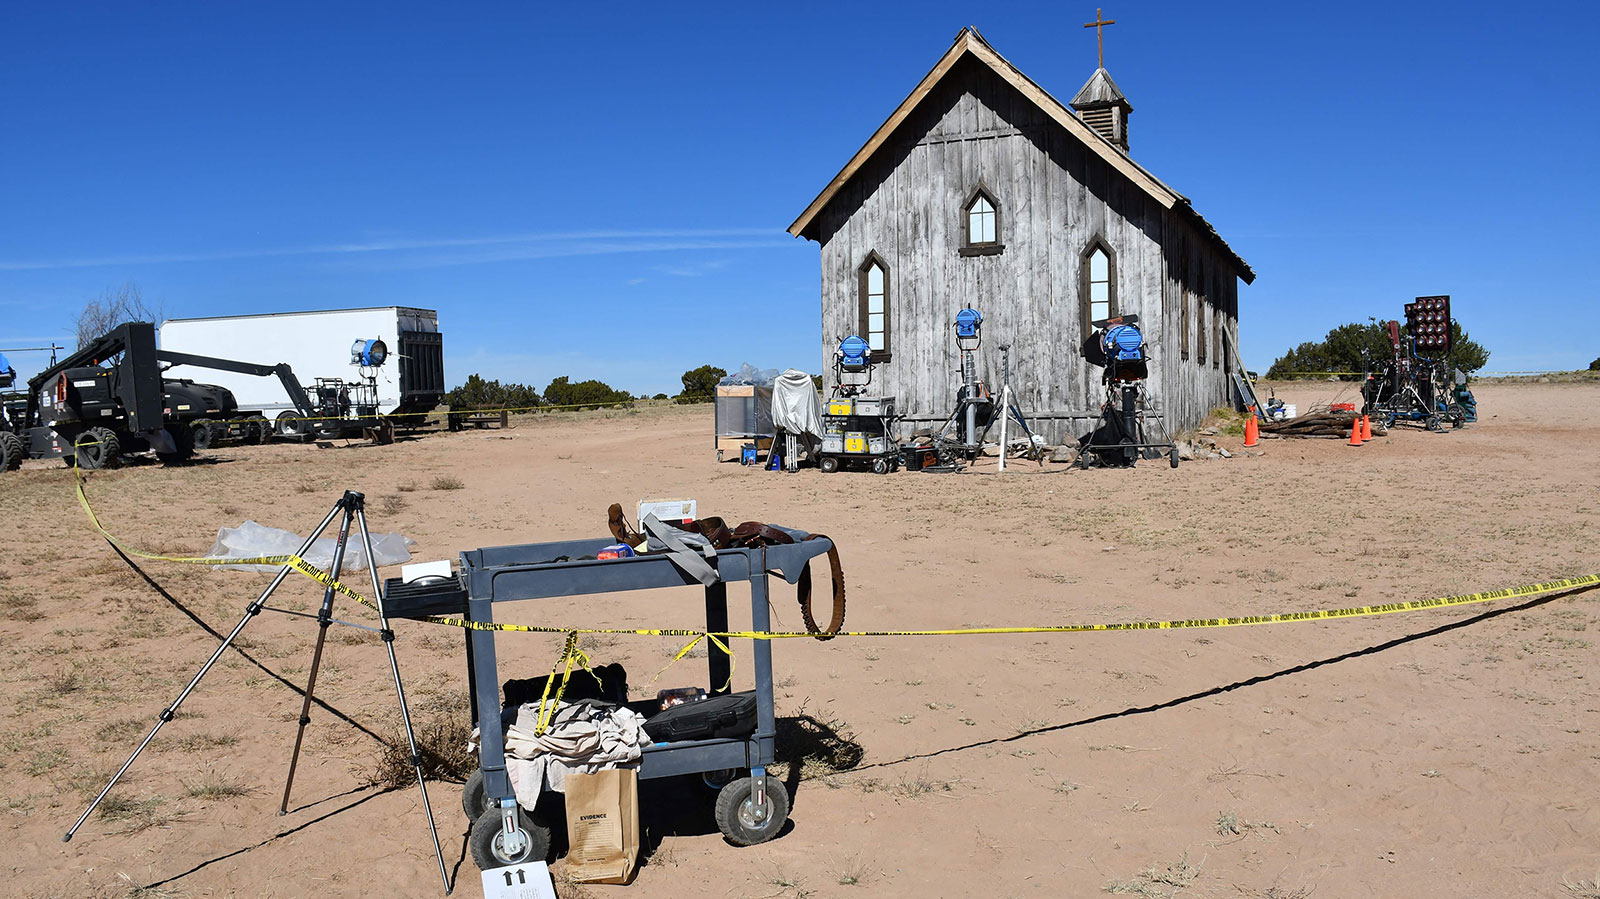 A prop cart rests by the scene of the shooting at the Bonanza Creek Ranch in Santa Fe on October 21.